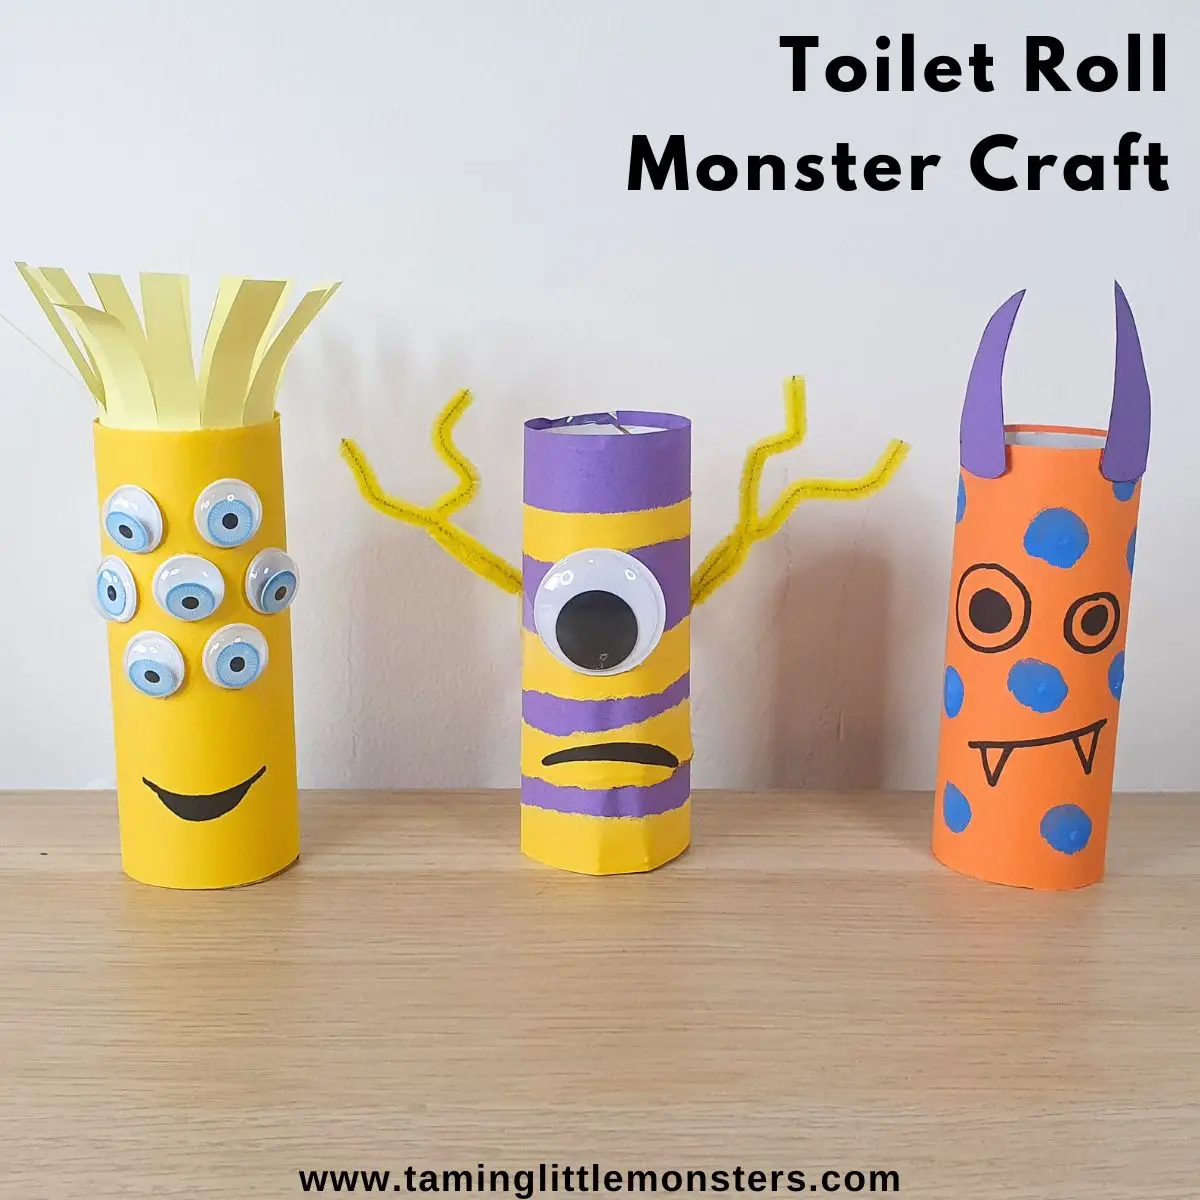 Fun Toilet Paper Roll Monster Craft for Kids - Taming Little Monsters